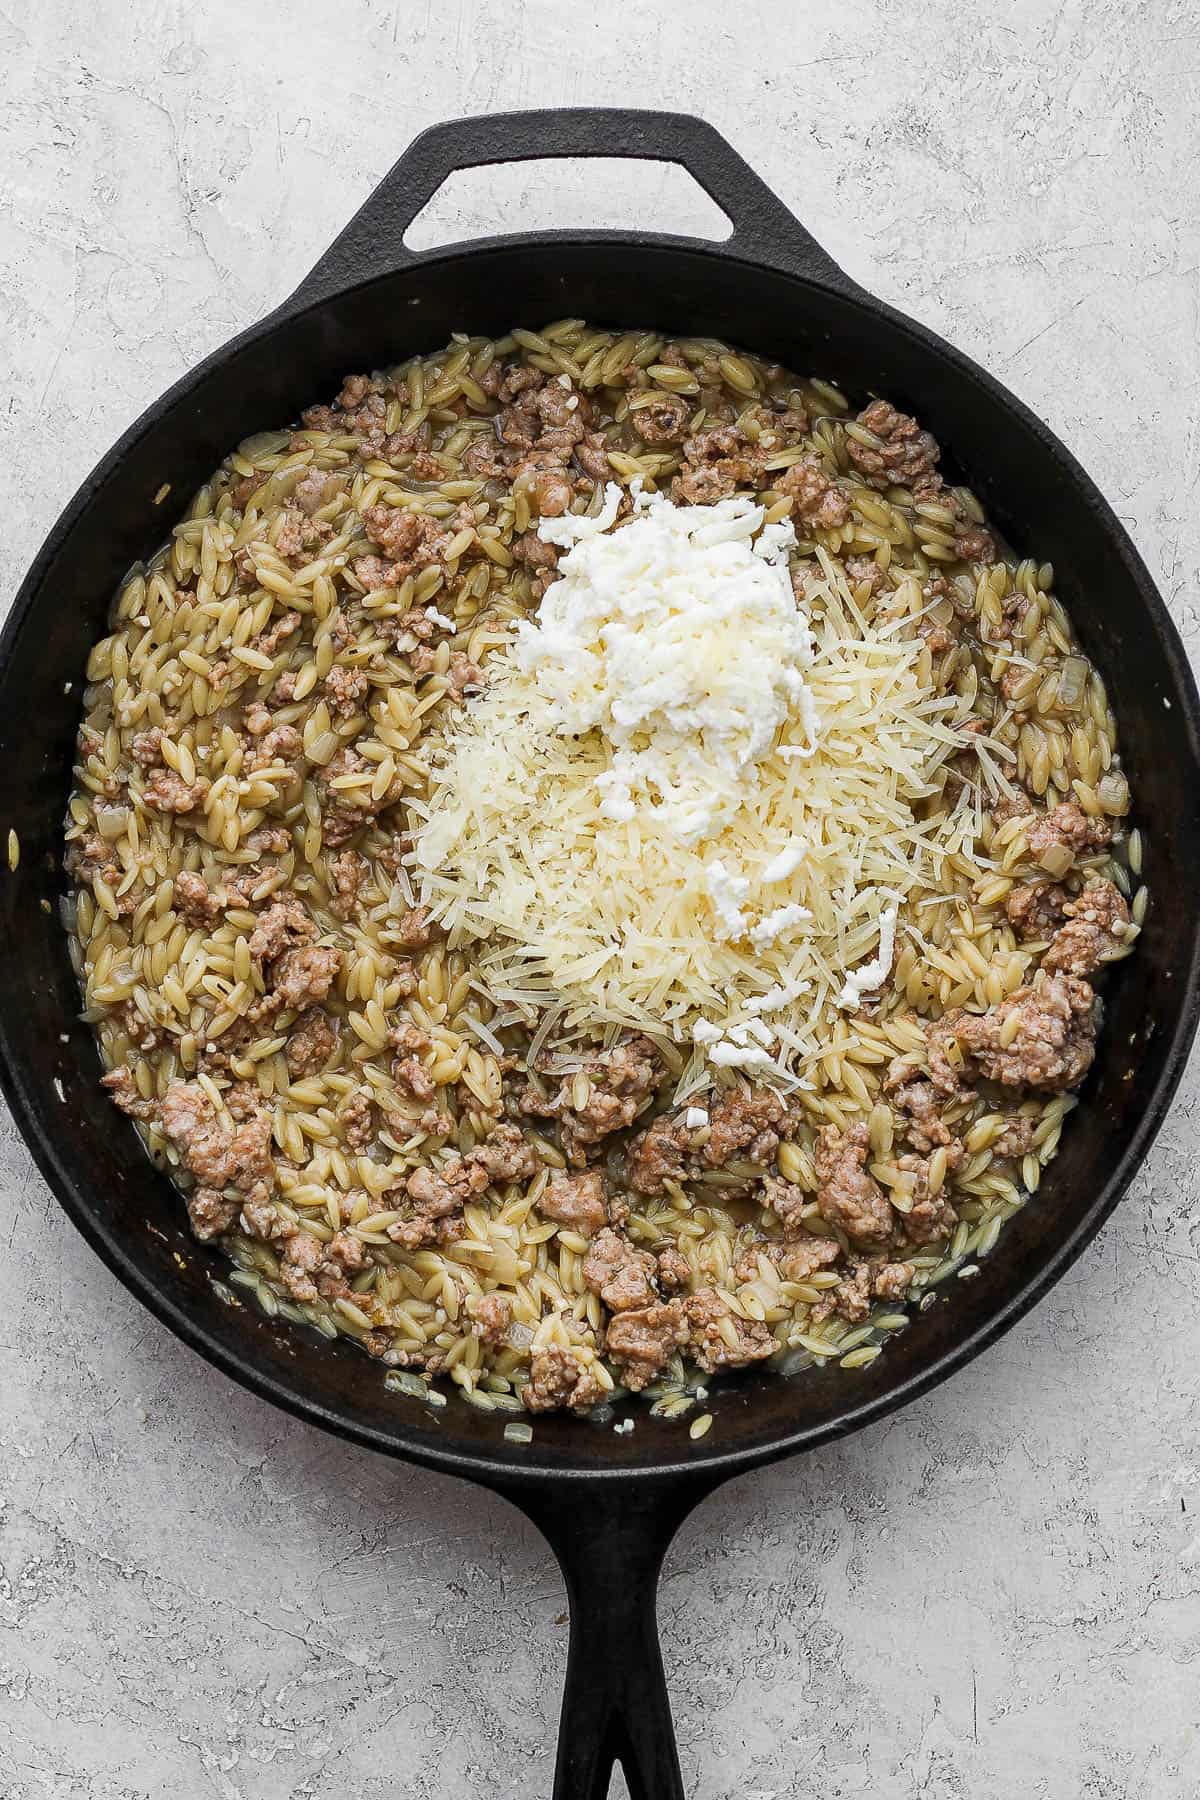 The sausage skillet with the orzo fully cooked and cheese added on top.